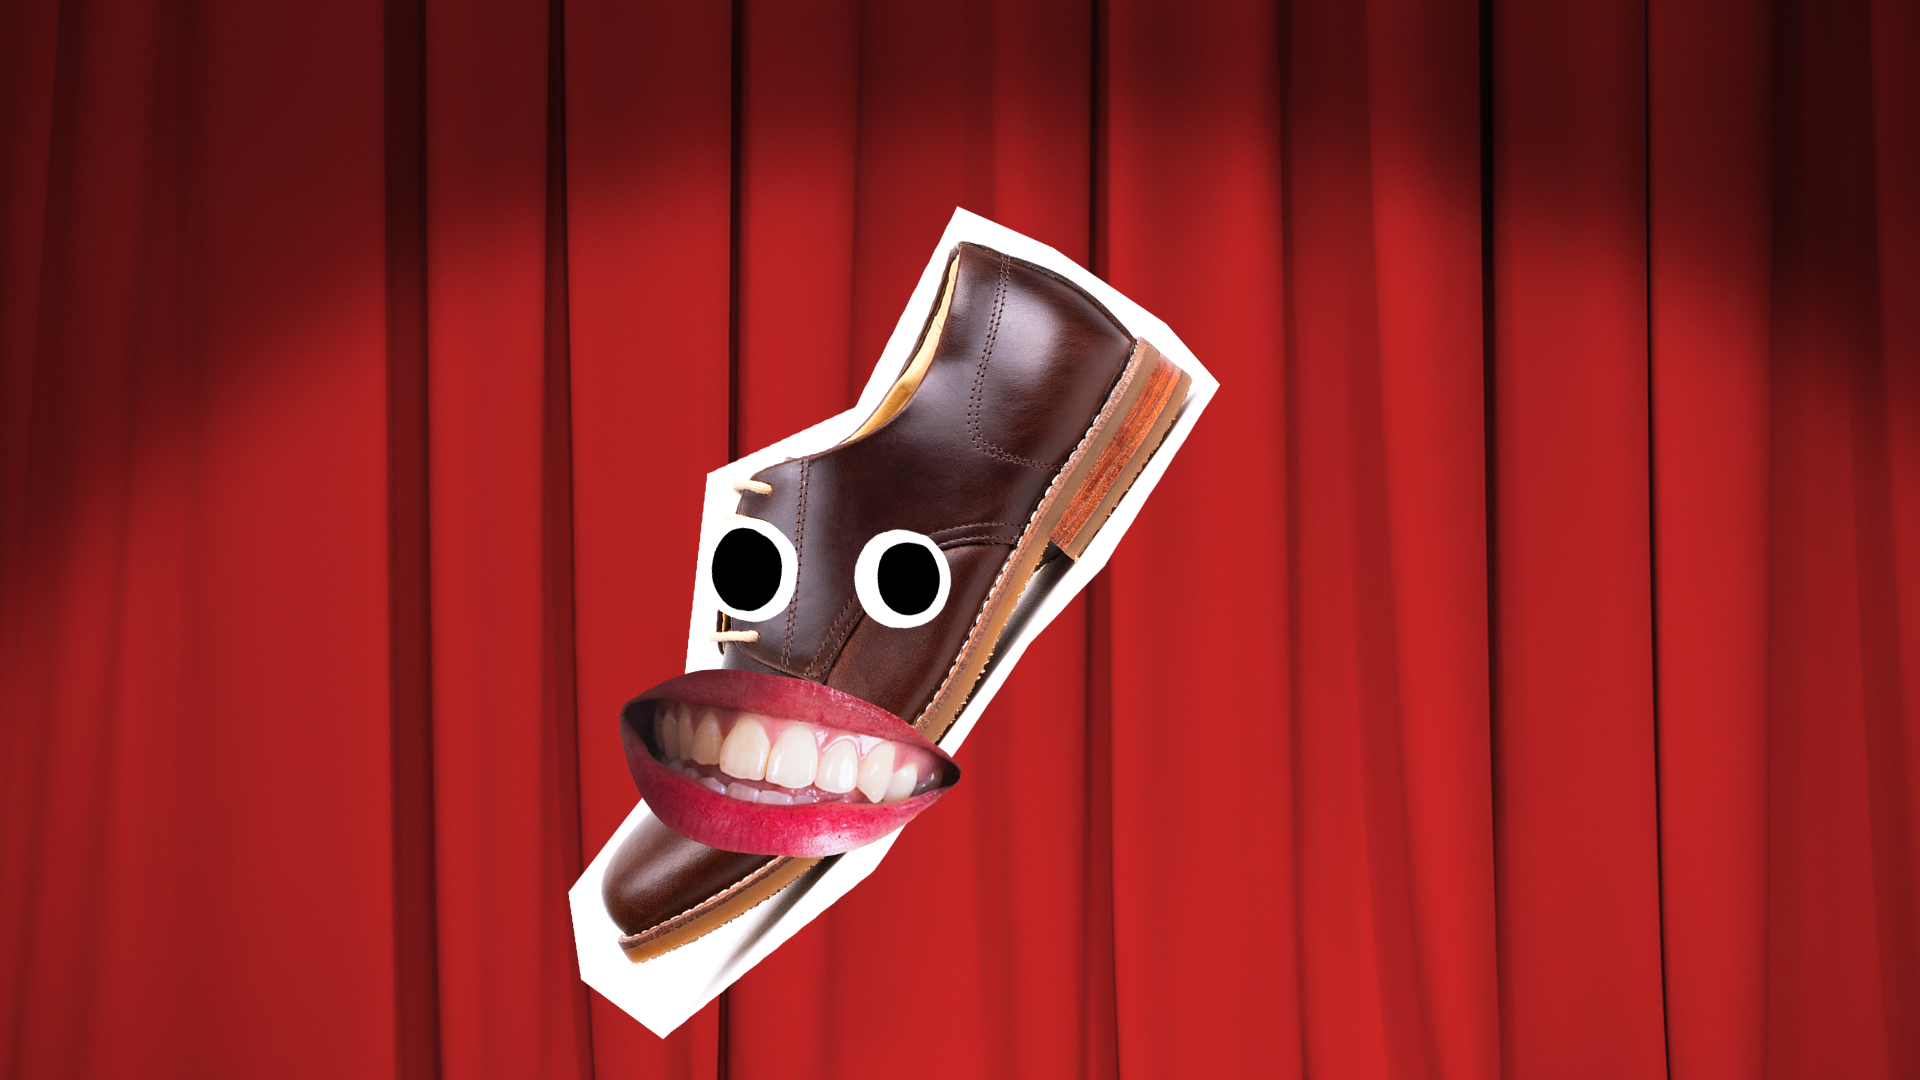 A shoe with a smile on its face in front of a theatrical red curtain